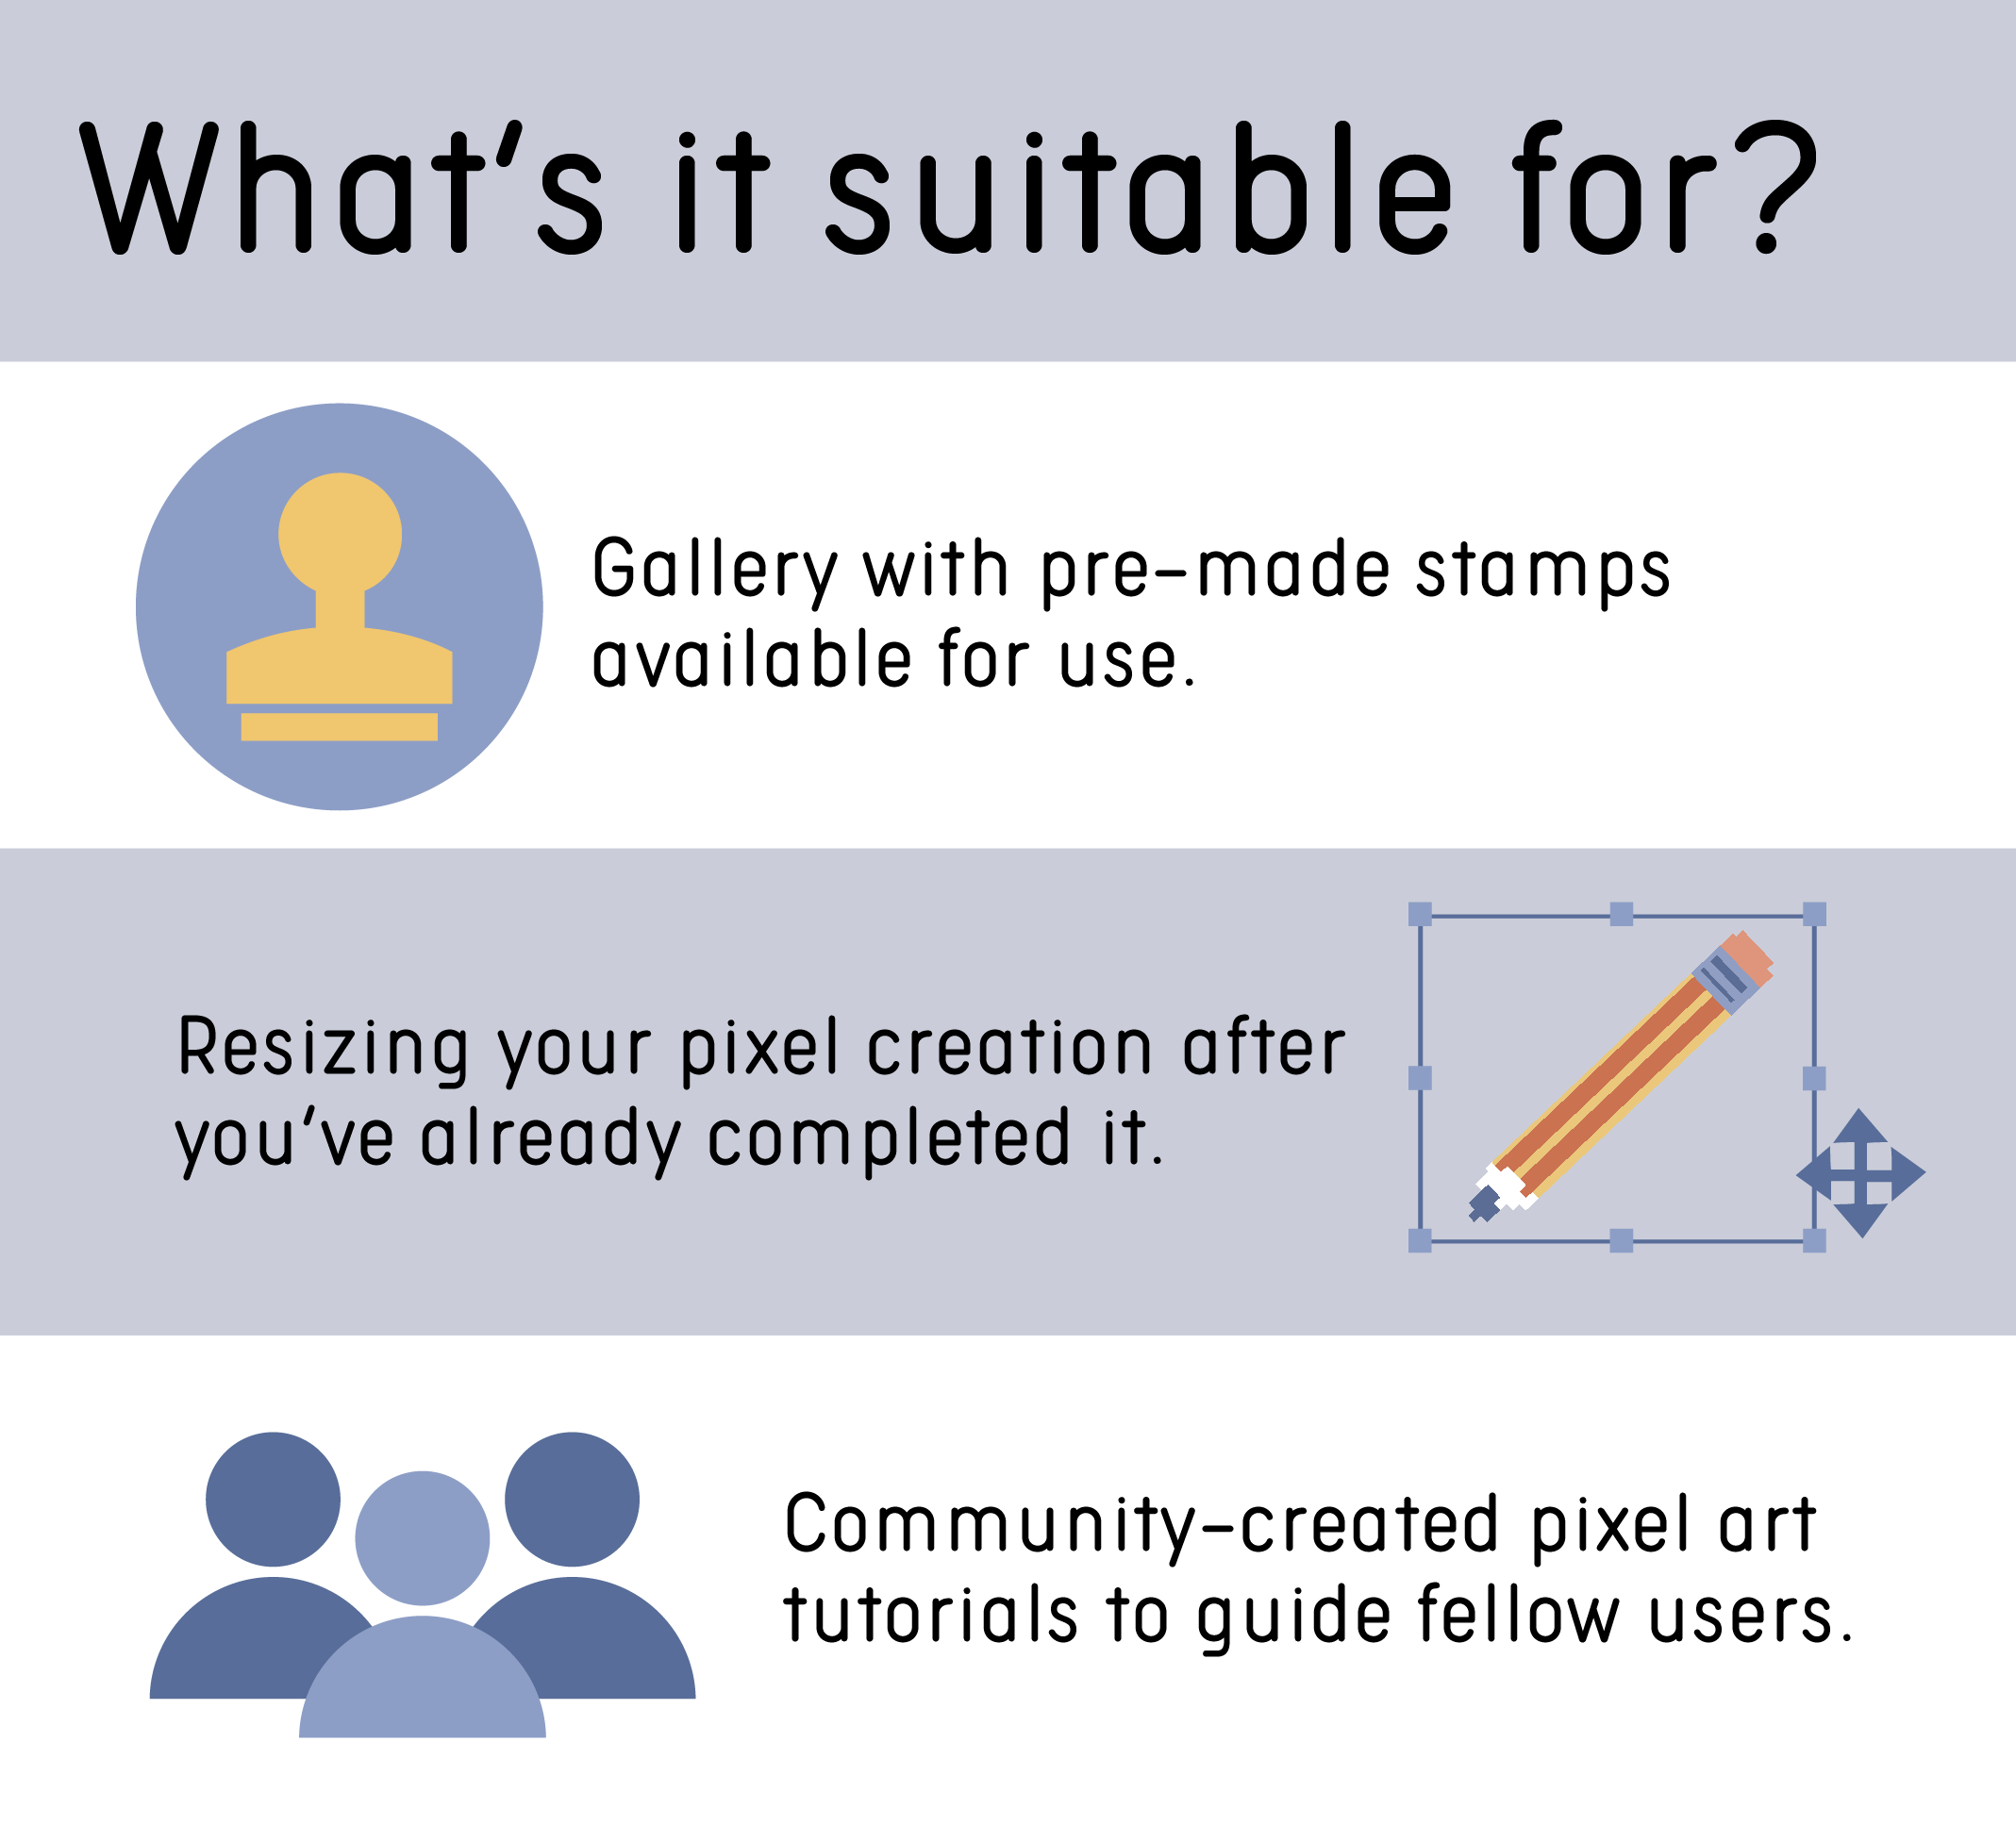 Gallery with pre-made stamps available for use. Resizing your image after you already completed it. Community-created pixel art tutorials to guide fellow users.